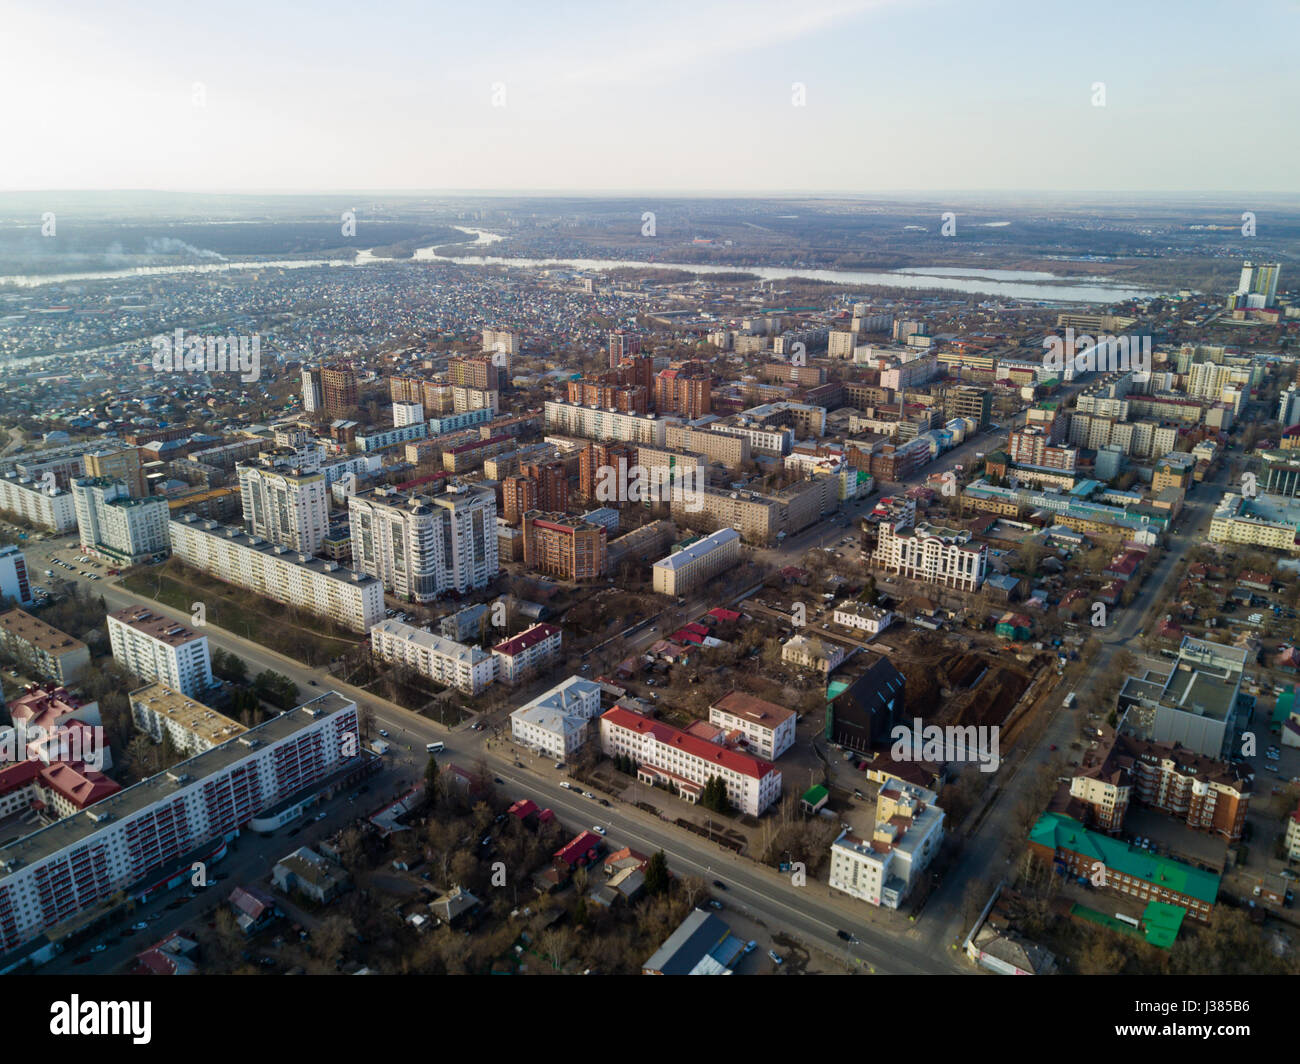 The cultural center of Ufa city. Aerial view Stock Photo